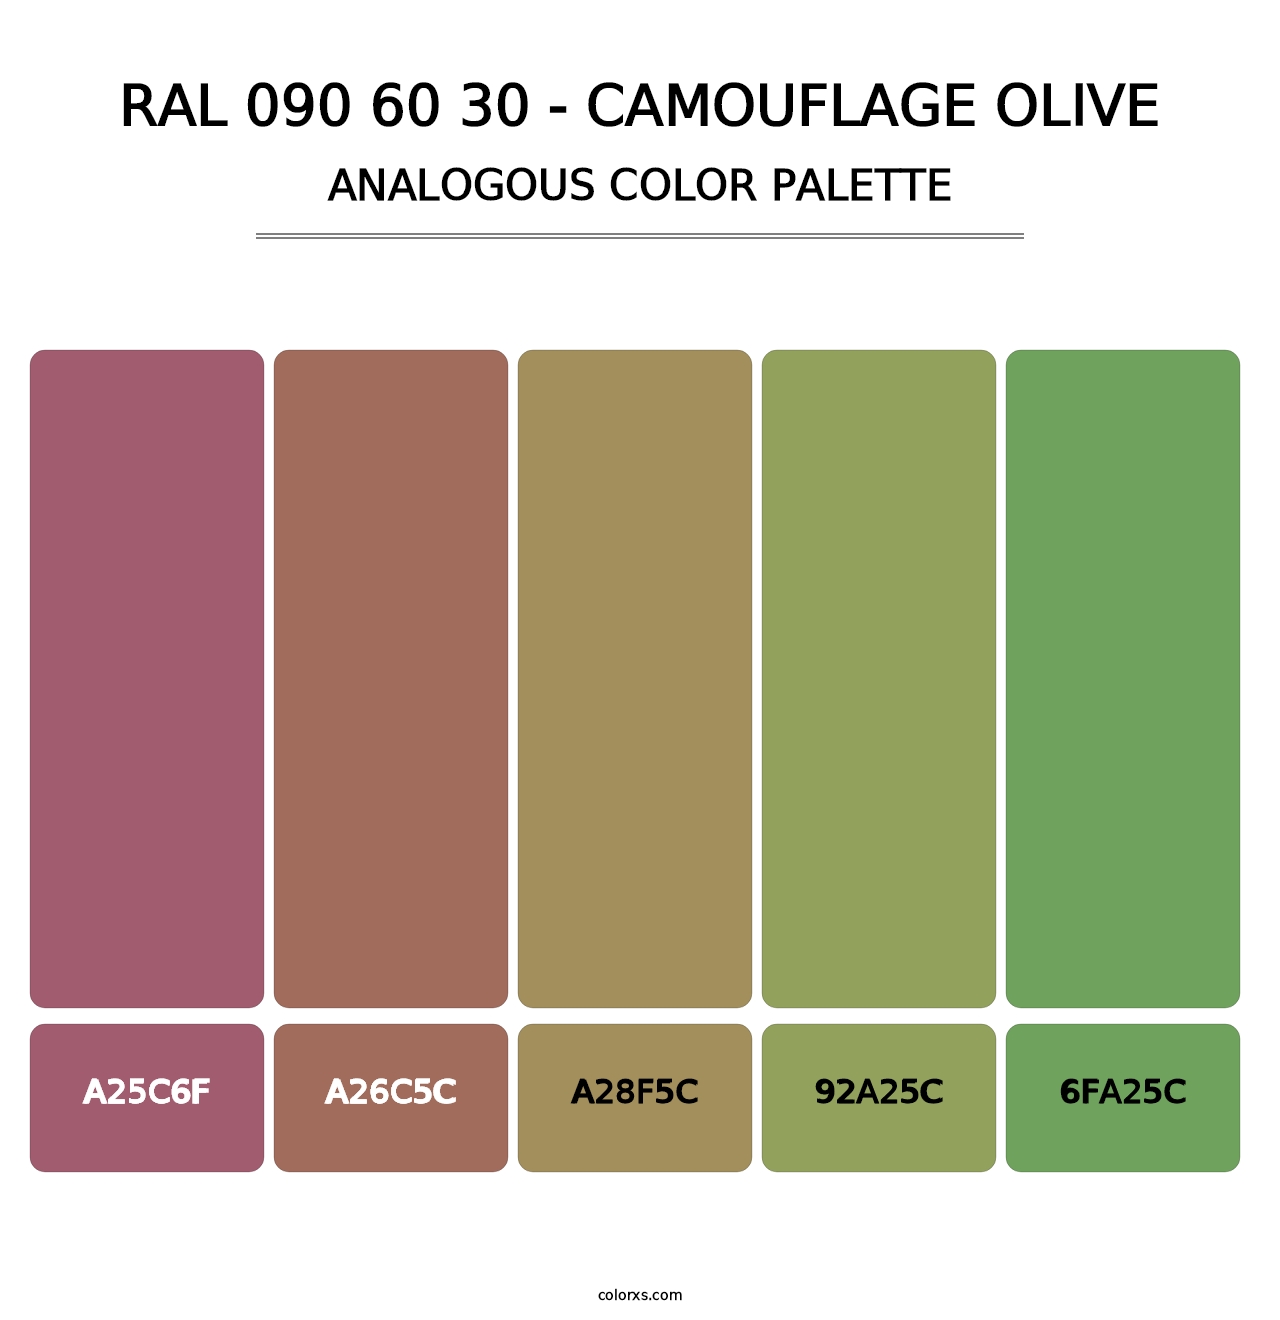 RAL 090 60 30 - Camouflage Olive - Analogous Color Palette